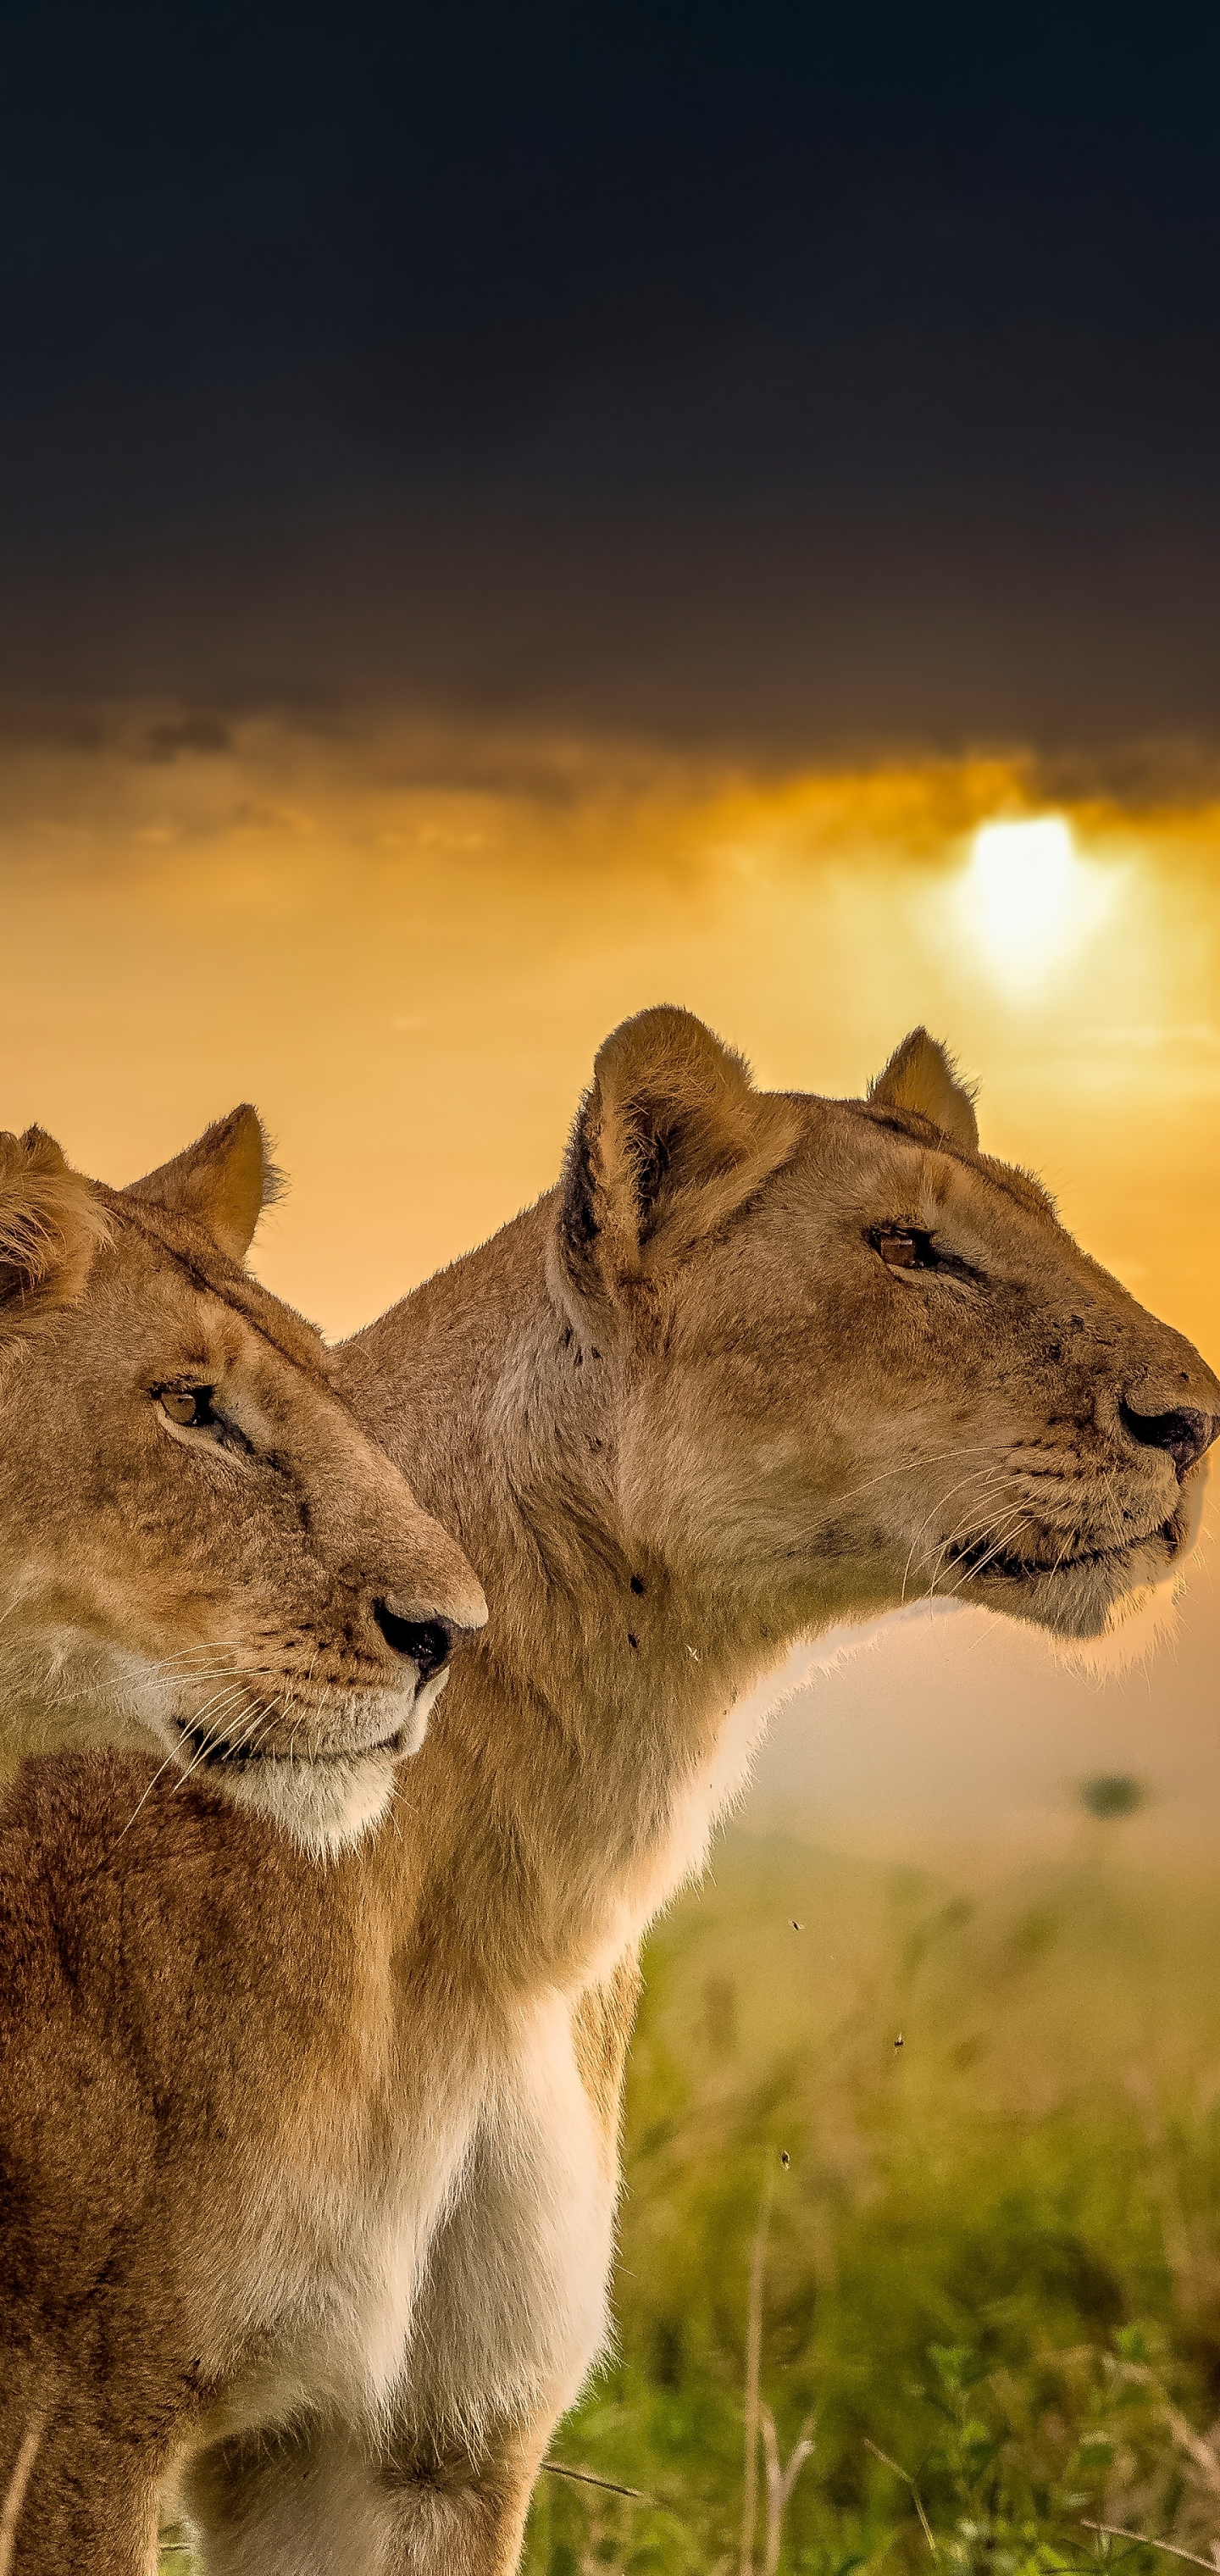 Lioness HD Wallpapers Backgrounds  Lion wallpaper Lioness and cubs Lions